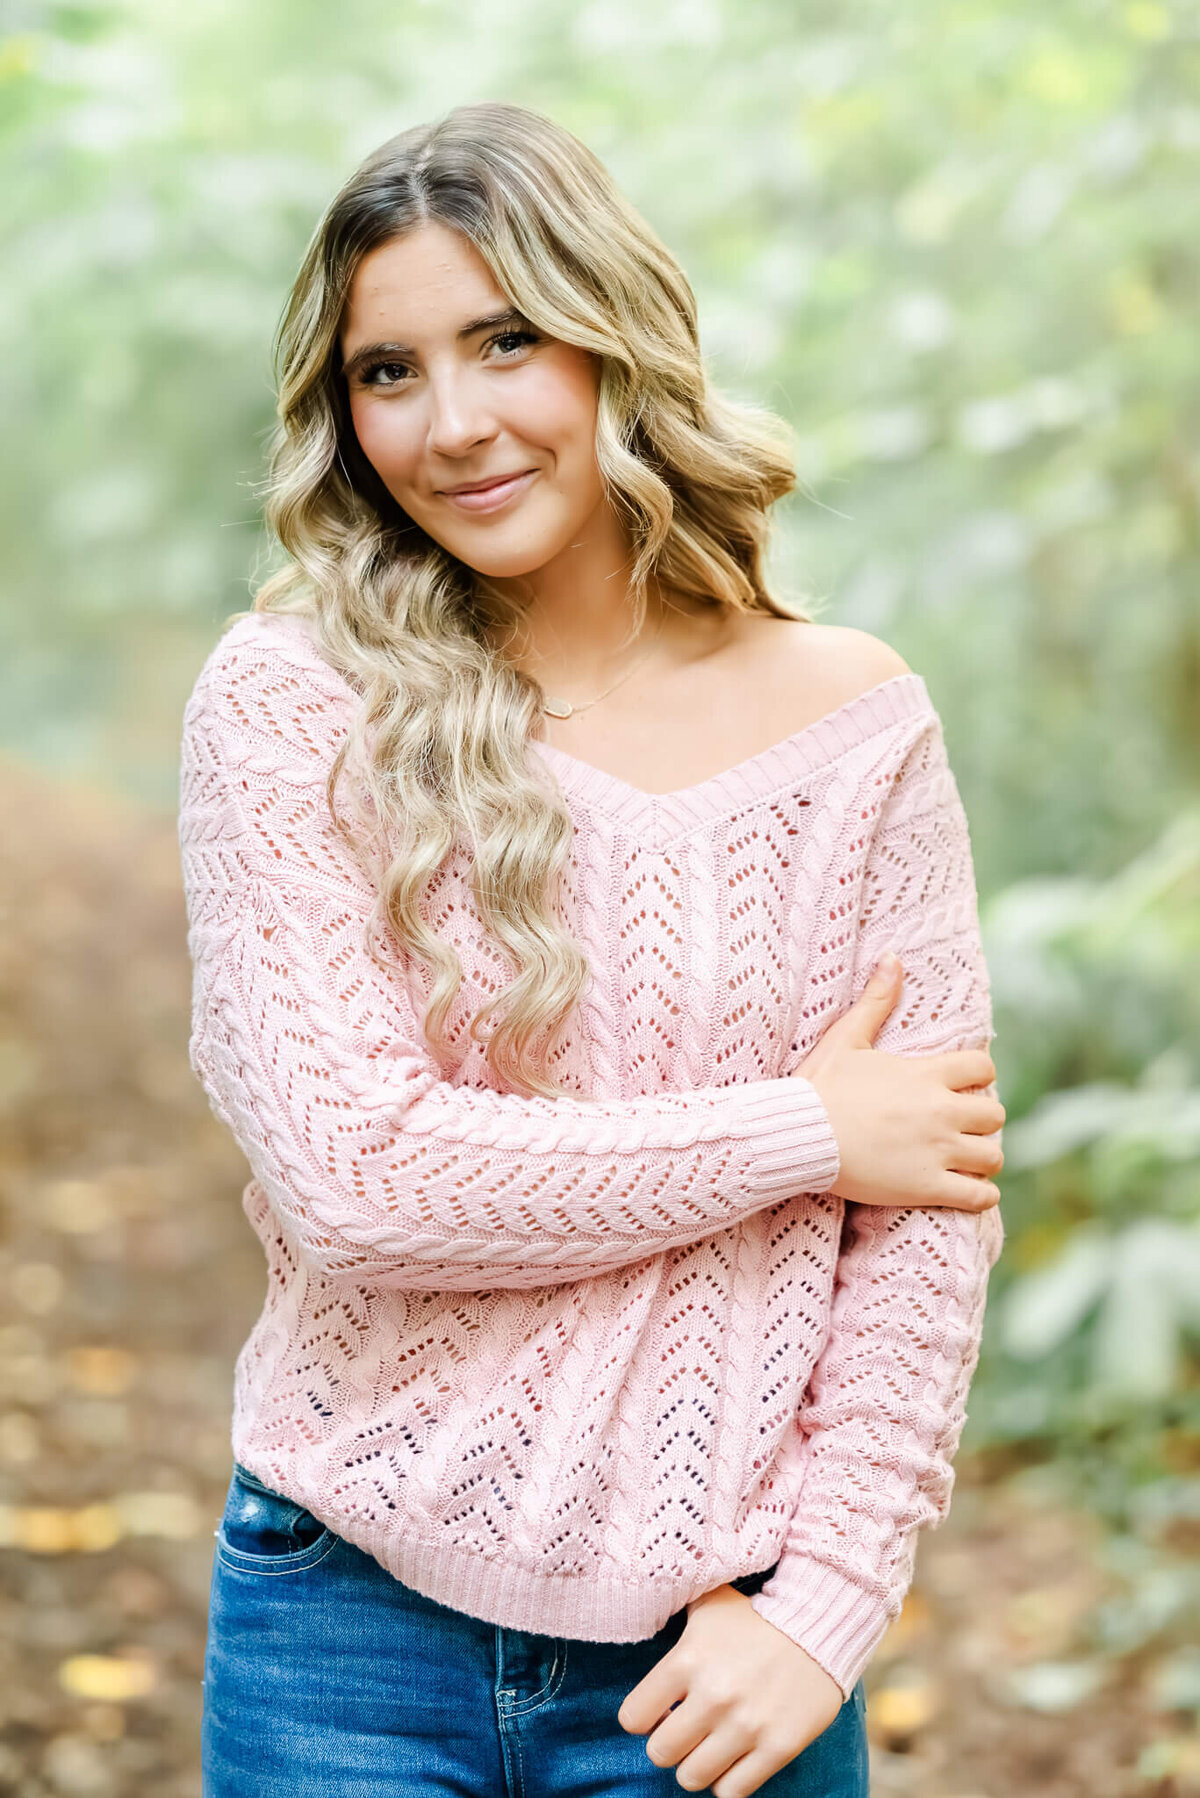 A high school senior stands on a path in the Chesapeake Arboretum during her senior session. She is wearing a pink sweater and jeans.